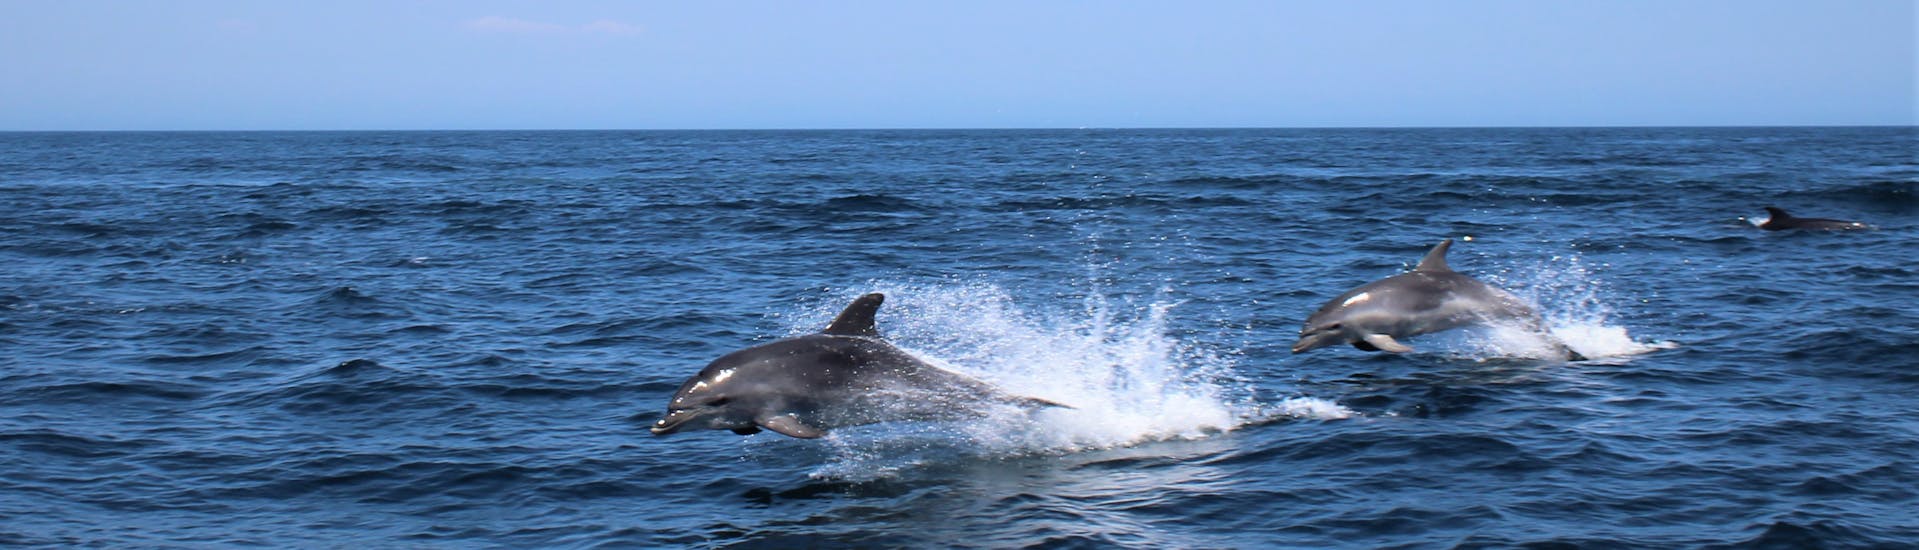 Two dolphins jumping out of the water during the Boat Trip to Benagil Cave with Dolphin Watching from Salema Tours.